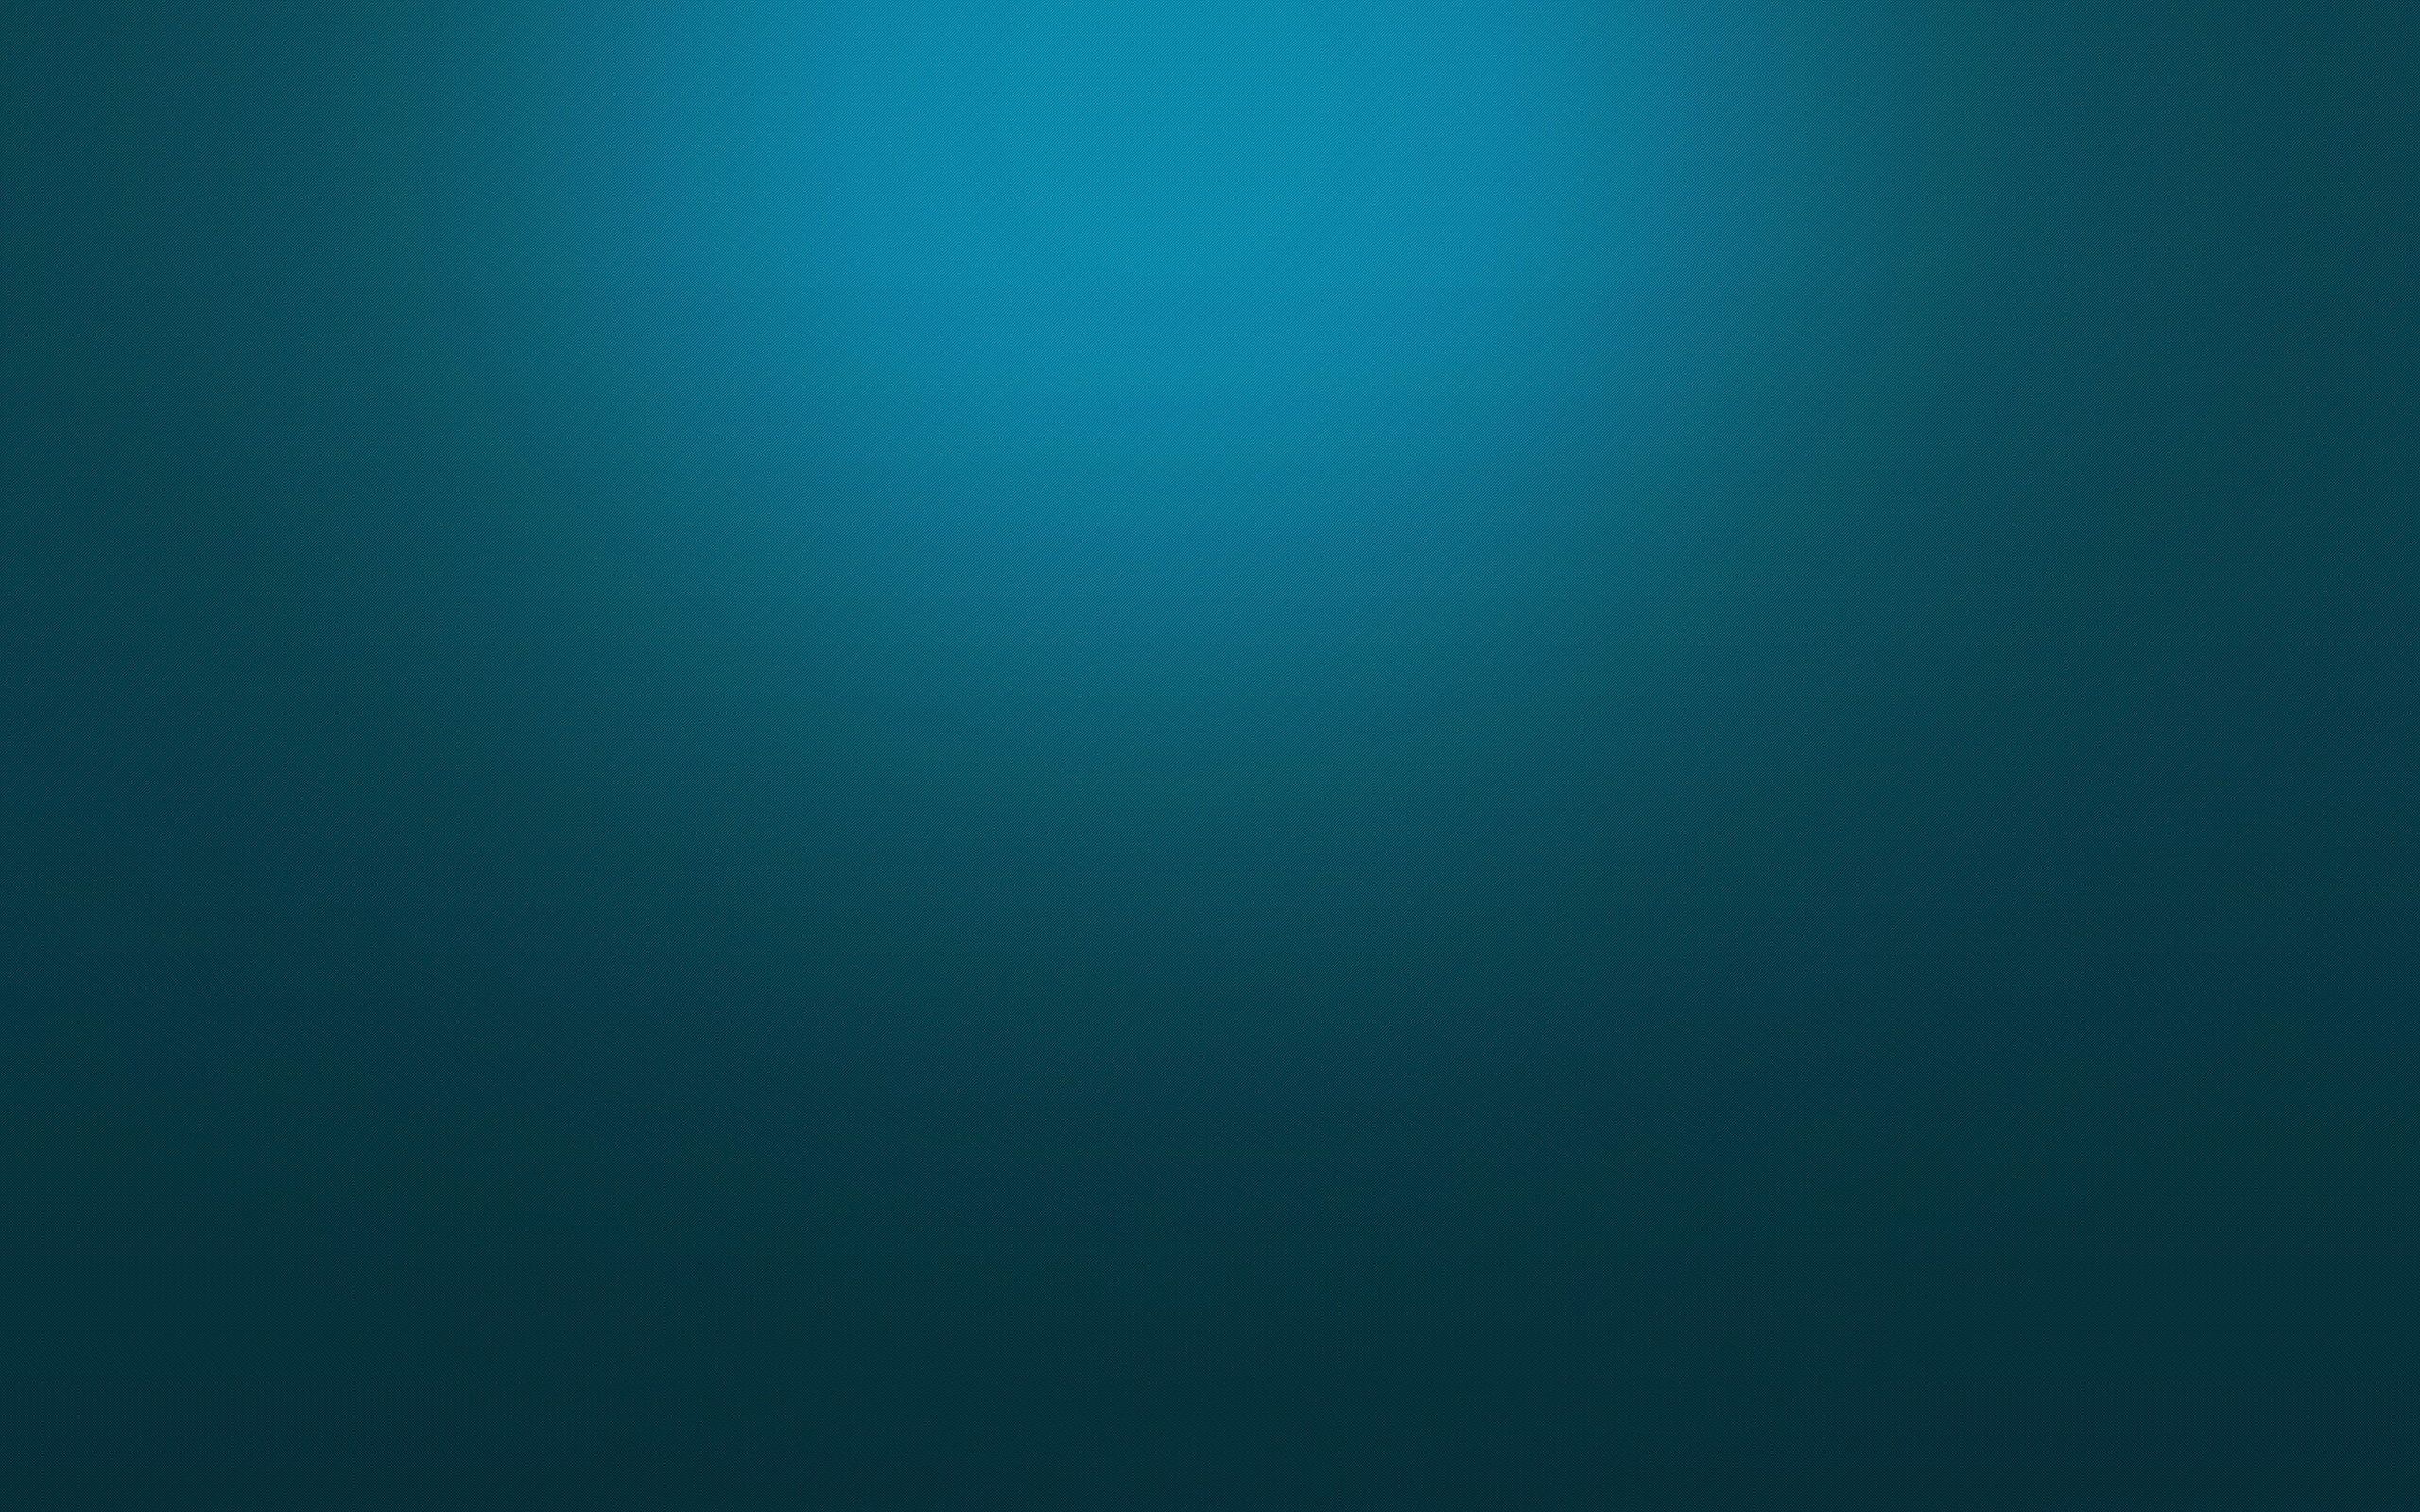 2 Cyan HD Wallpapers | Backgrounds - Wallpaper Abyss